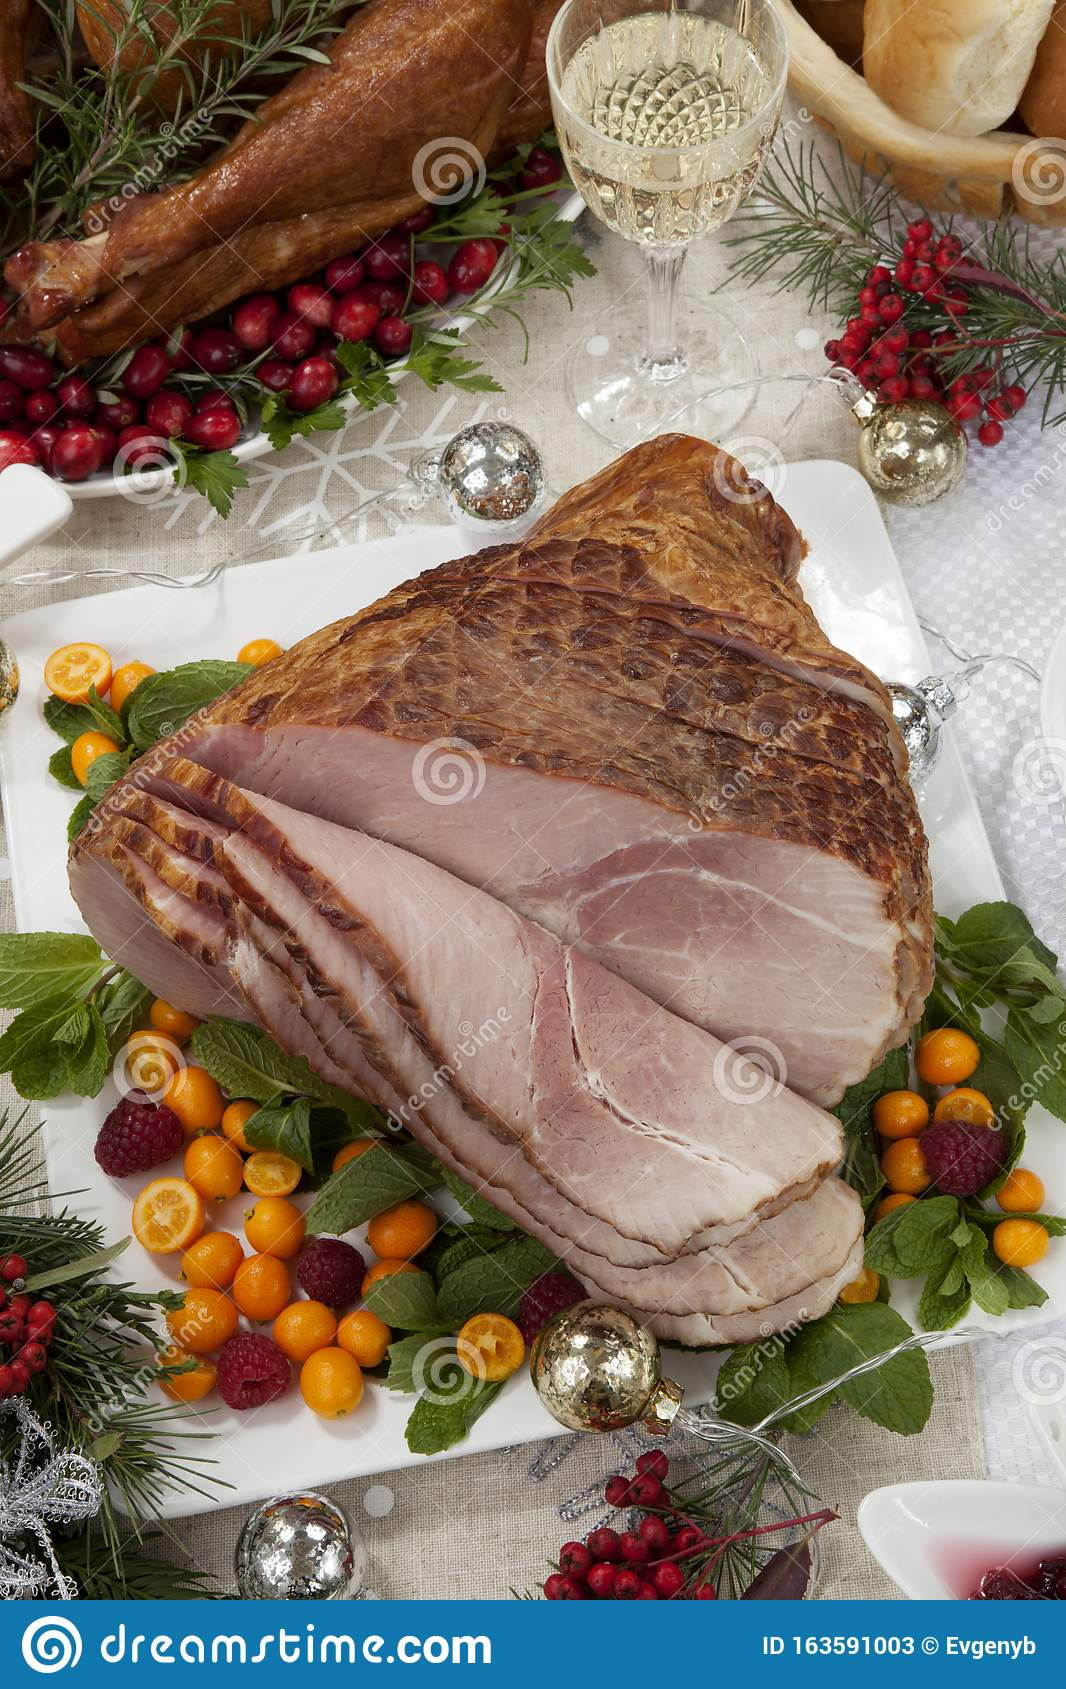 Side Dishes For Smoked Turkey
 Christmas Roasted Ham And Smoked Turkey Stock Image